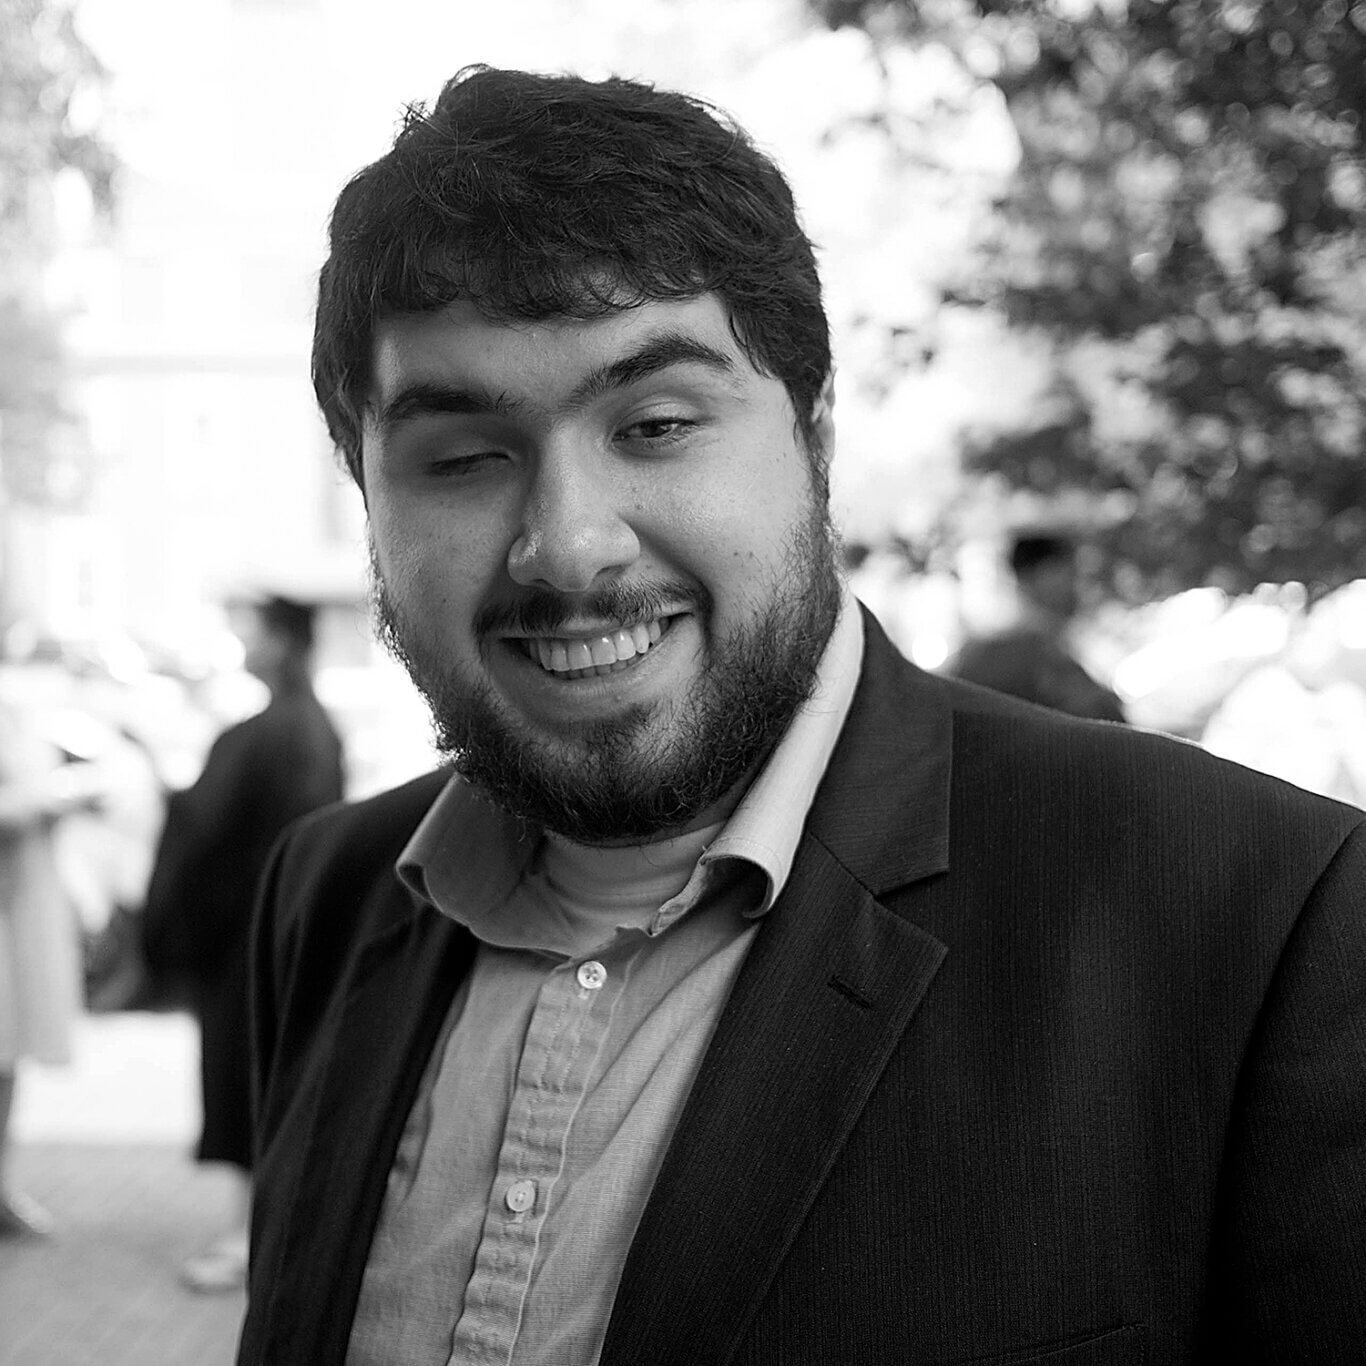 A black and white headshot of a Persian man with light skin and a toothy grin. Shown from the chest up, he has a full beard and thick wavy dark hair. On our left, his right eye is closed, his thick arched eyebrows raised slightly. He wears a charcoal grey sports coat over a light colored button-down shirt. The background is out of focus, with people in graduation gowns and fuzzy foliage.